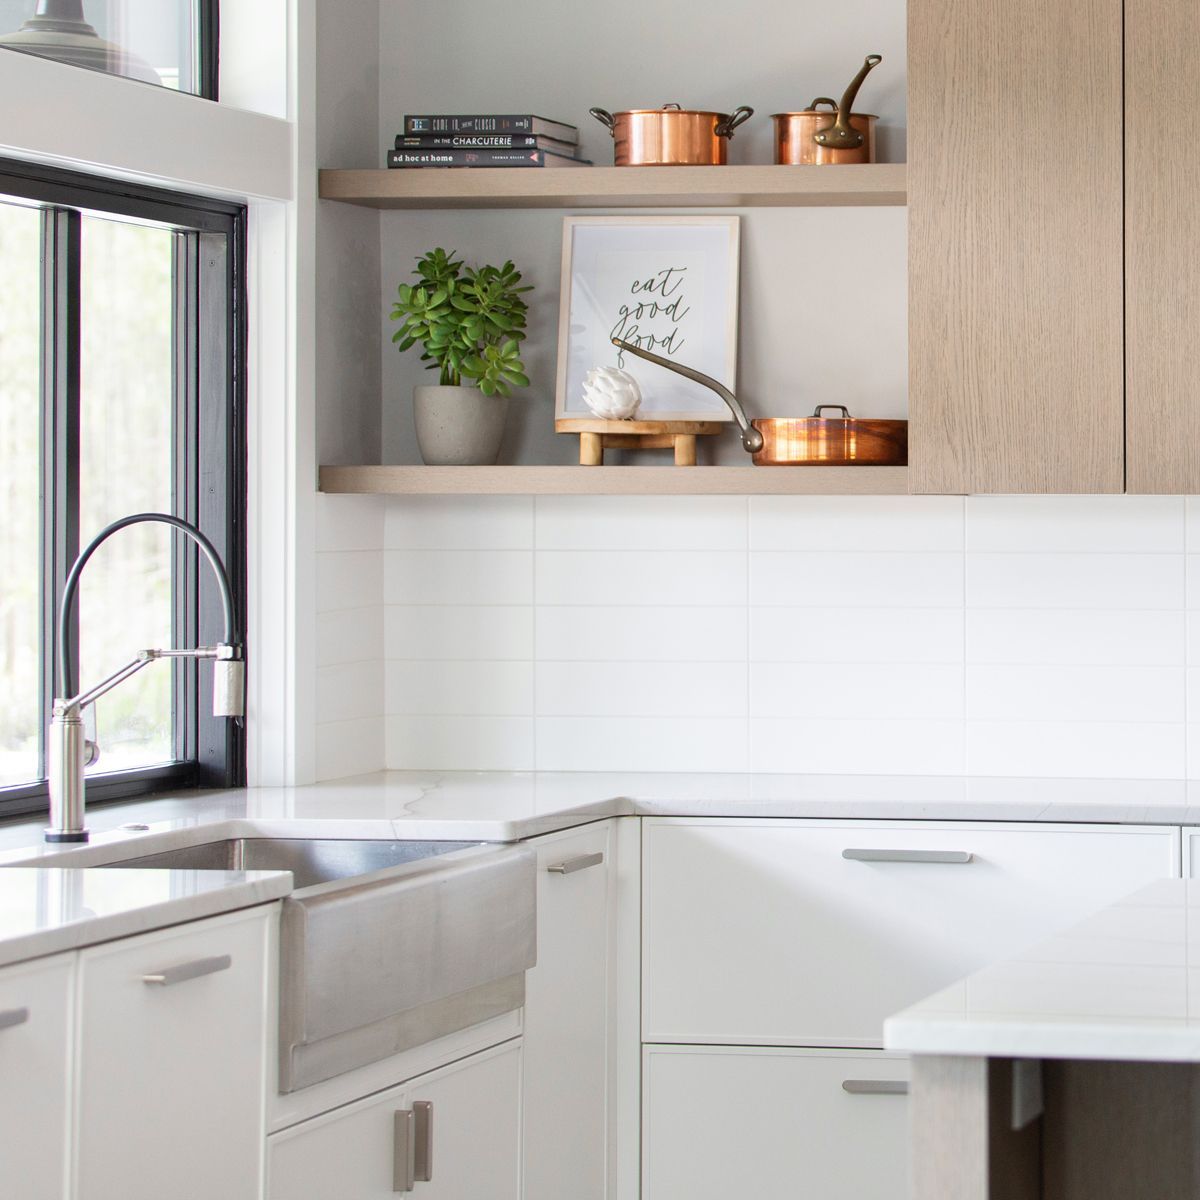 Modern kitchen with silver ranch style sink, white tile backsplash, white cabinets and countertops with accents of light-colored wood. Open-faced cabinet with copper pots